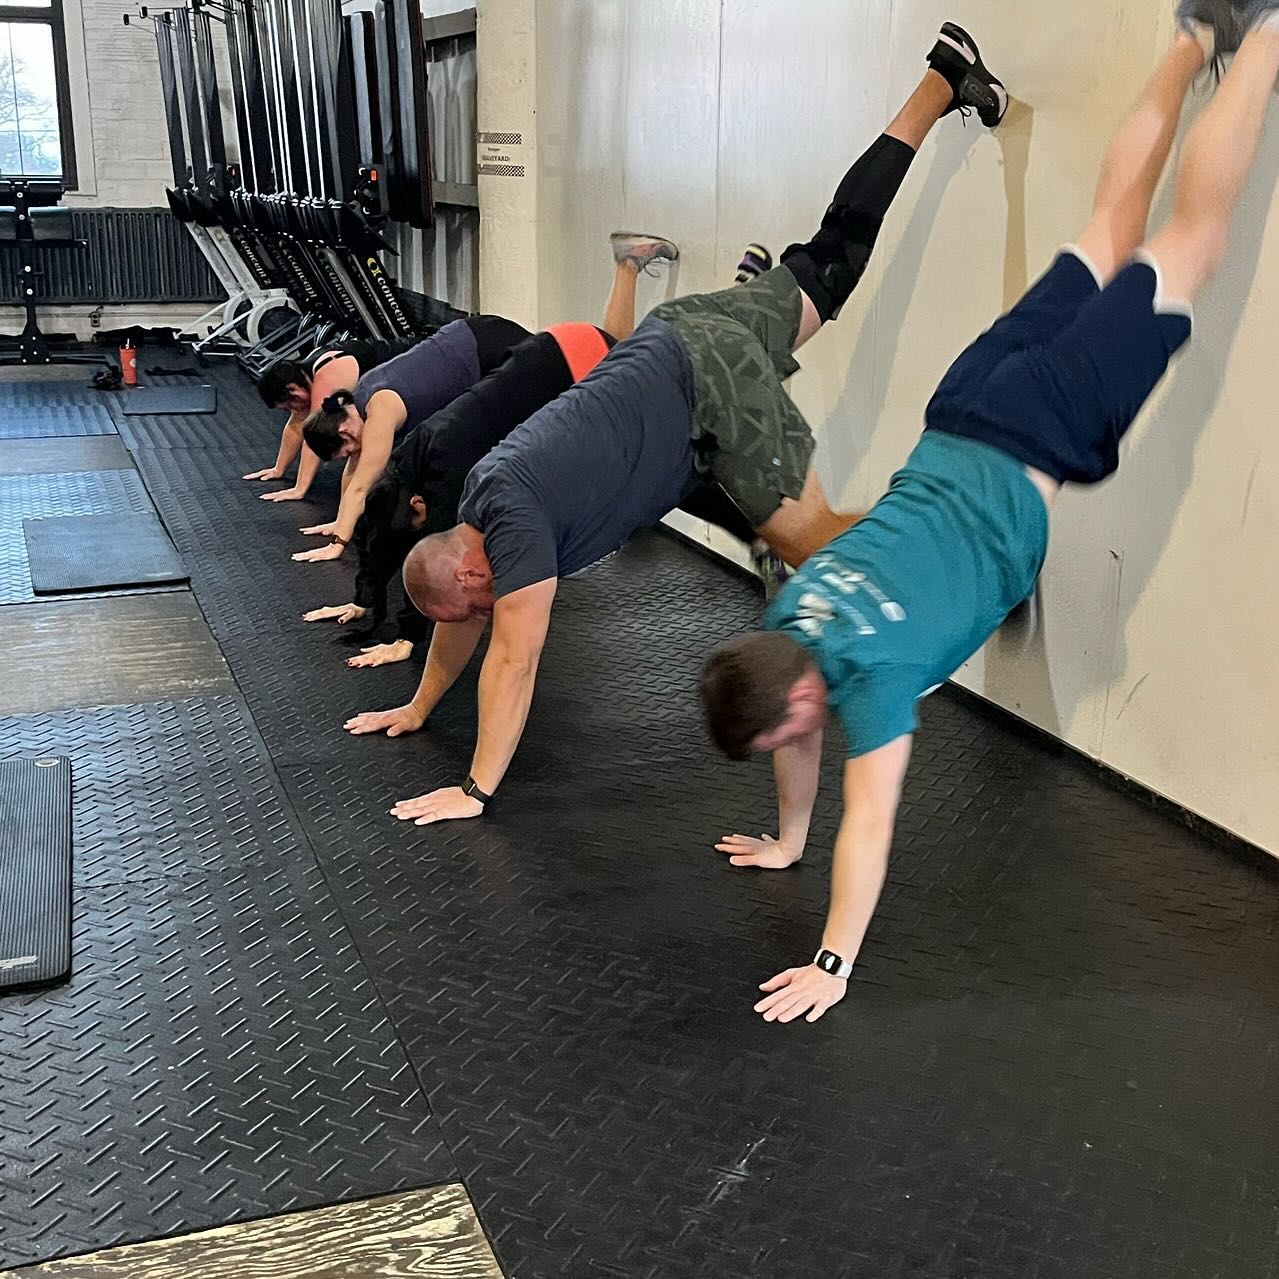 “You can’t go back and change the beginning but you can start where you are and change the ending.”
-C.S. Lewis

So often we hear people telling us that they aren’t fit enough yet to join a class… but if that was the case, none of our athletes would have ever started. We are all learning how to move our bodies and work out! We would love to have you. Check us out! Link in bio. 

 #BirdtownStrength #BirdtownStrong #FunctionalFitness #BeBetter #RedefiningStrength #TeamWorkMakesTheDreamWork #WeAreBirdtown #Lakewood #Ohio #LakewoodOhio